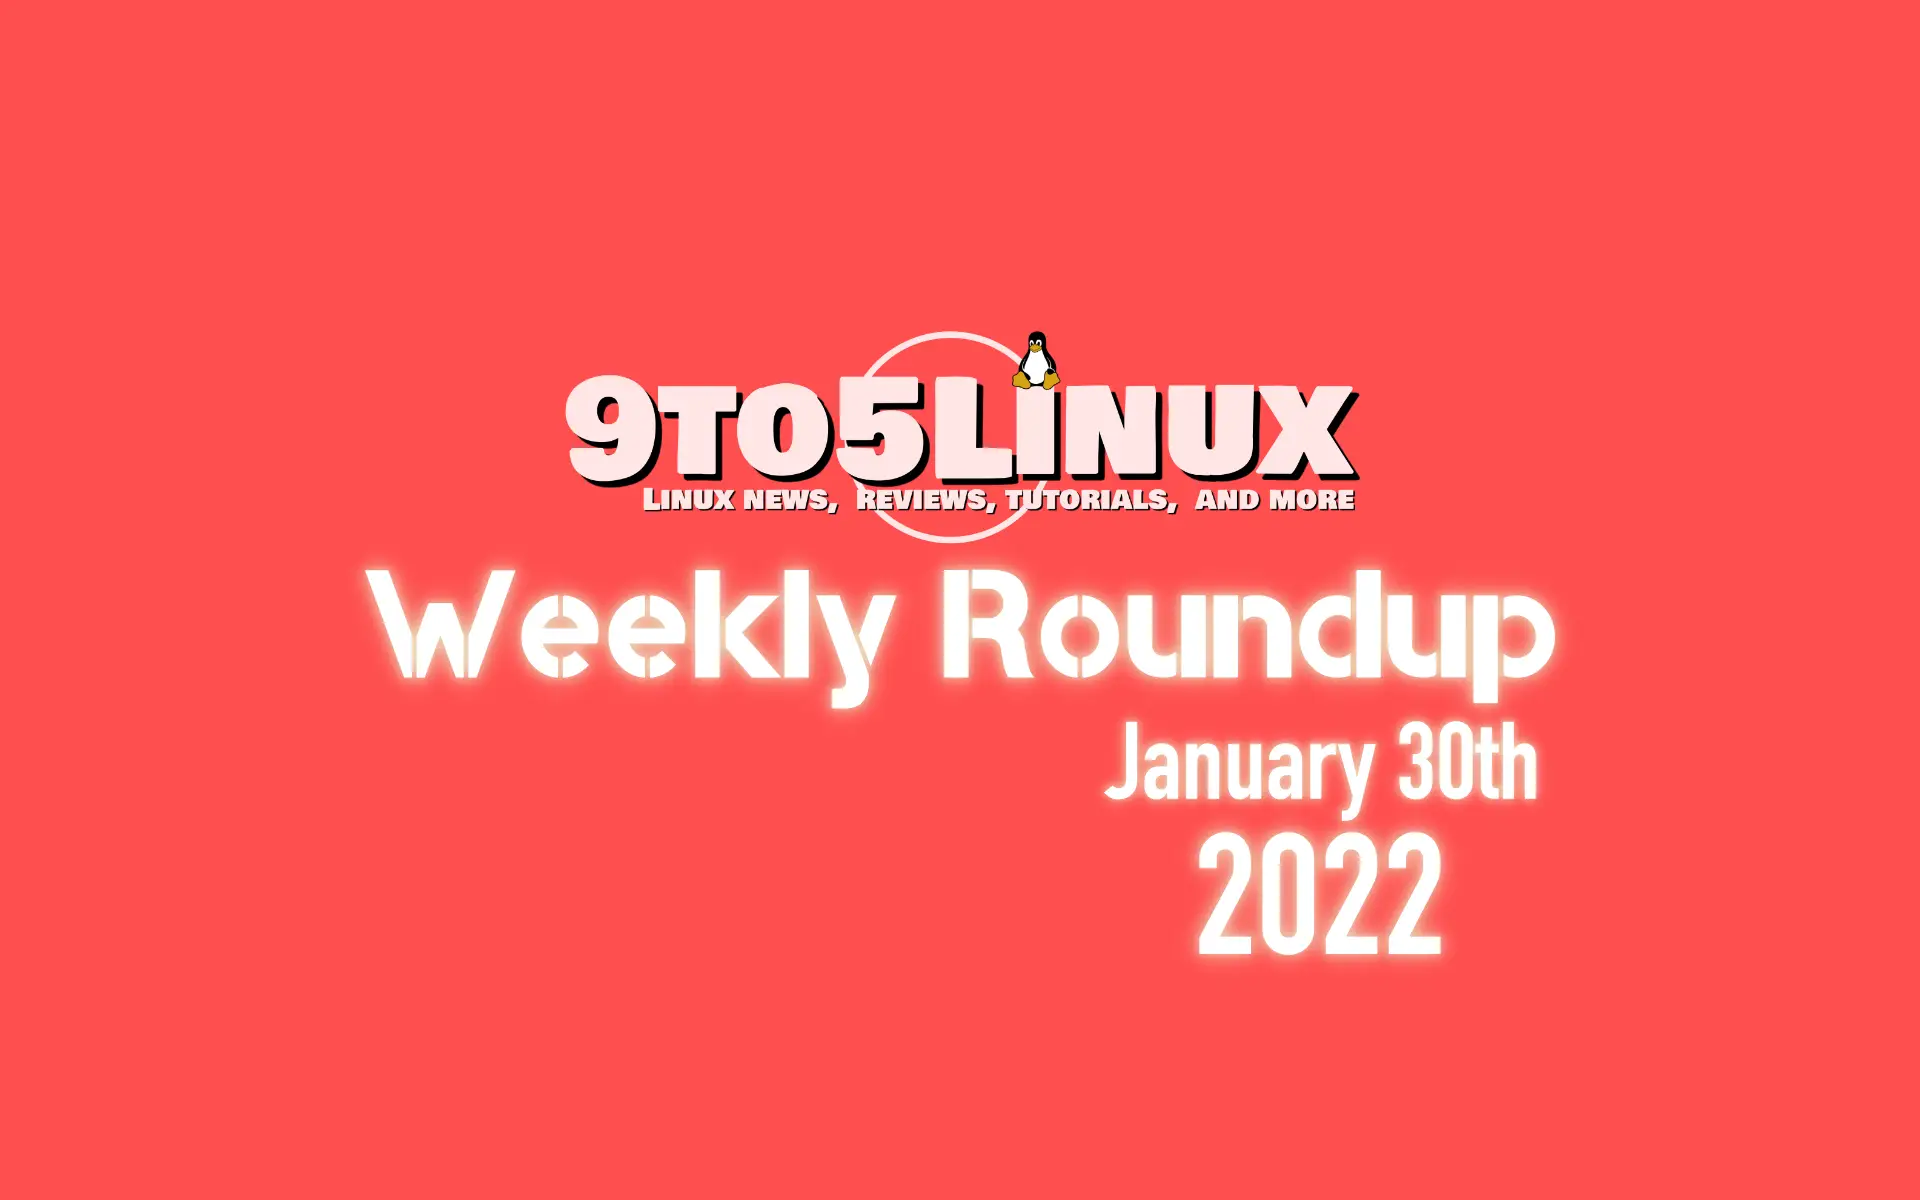 9to5Linux Weekly Roundup: January 30th, 2022